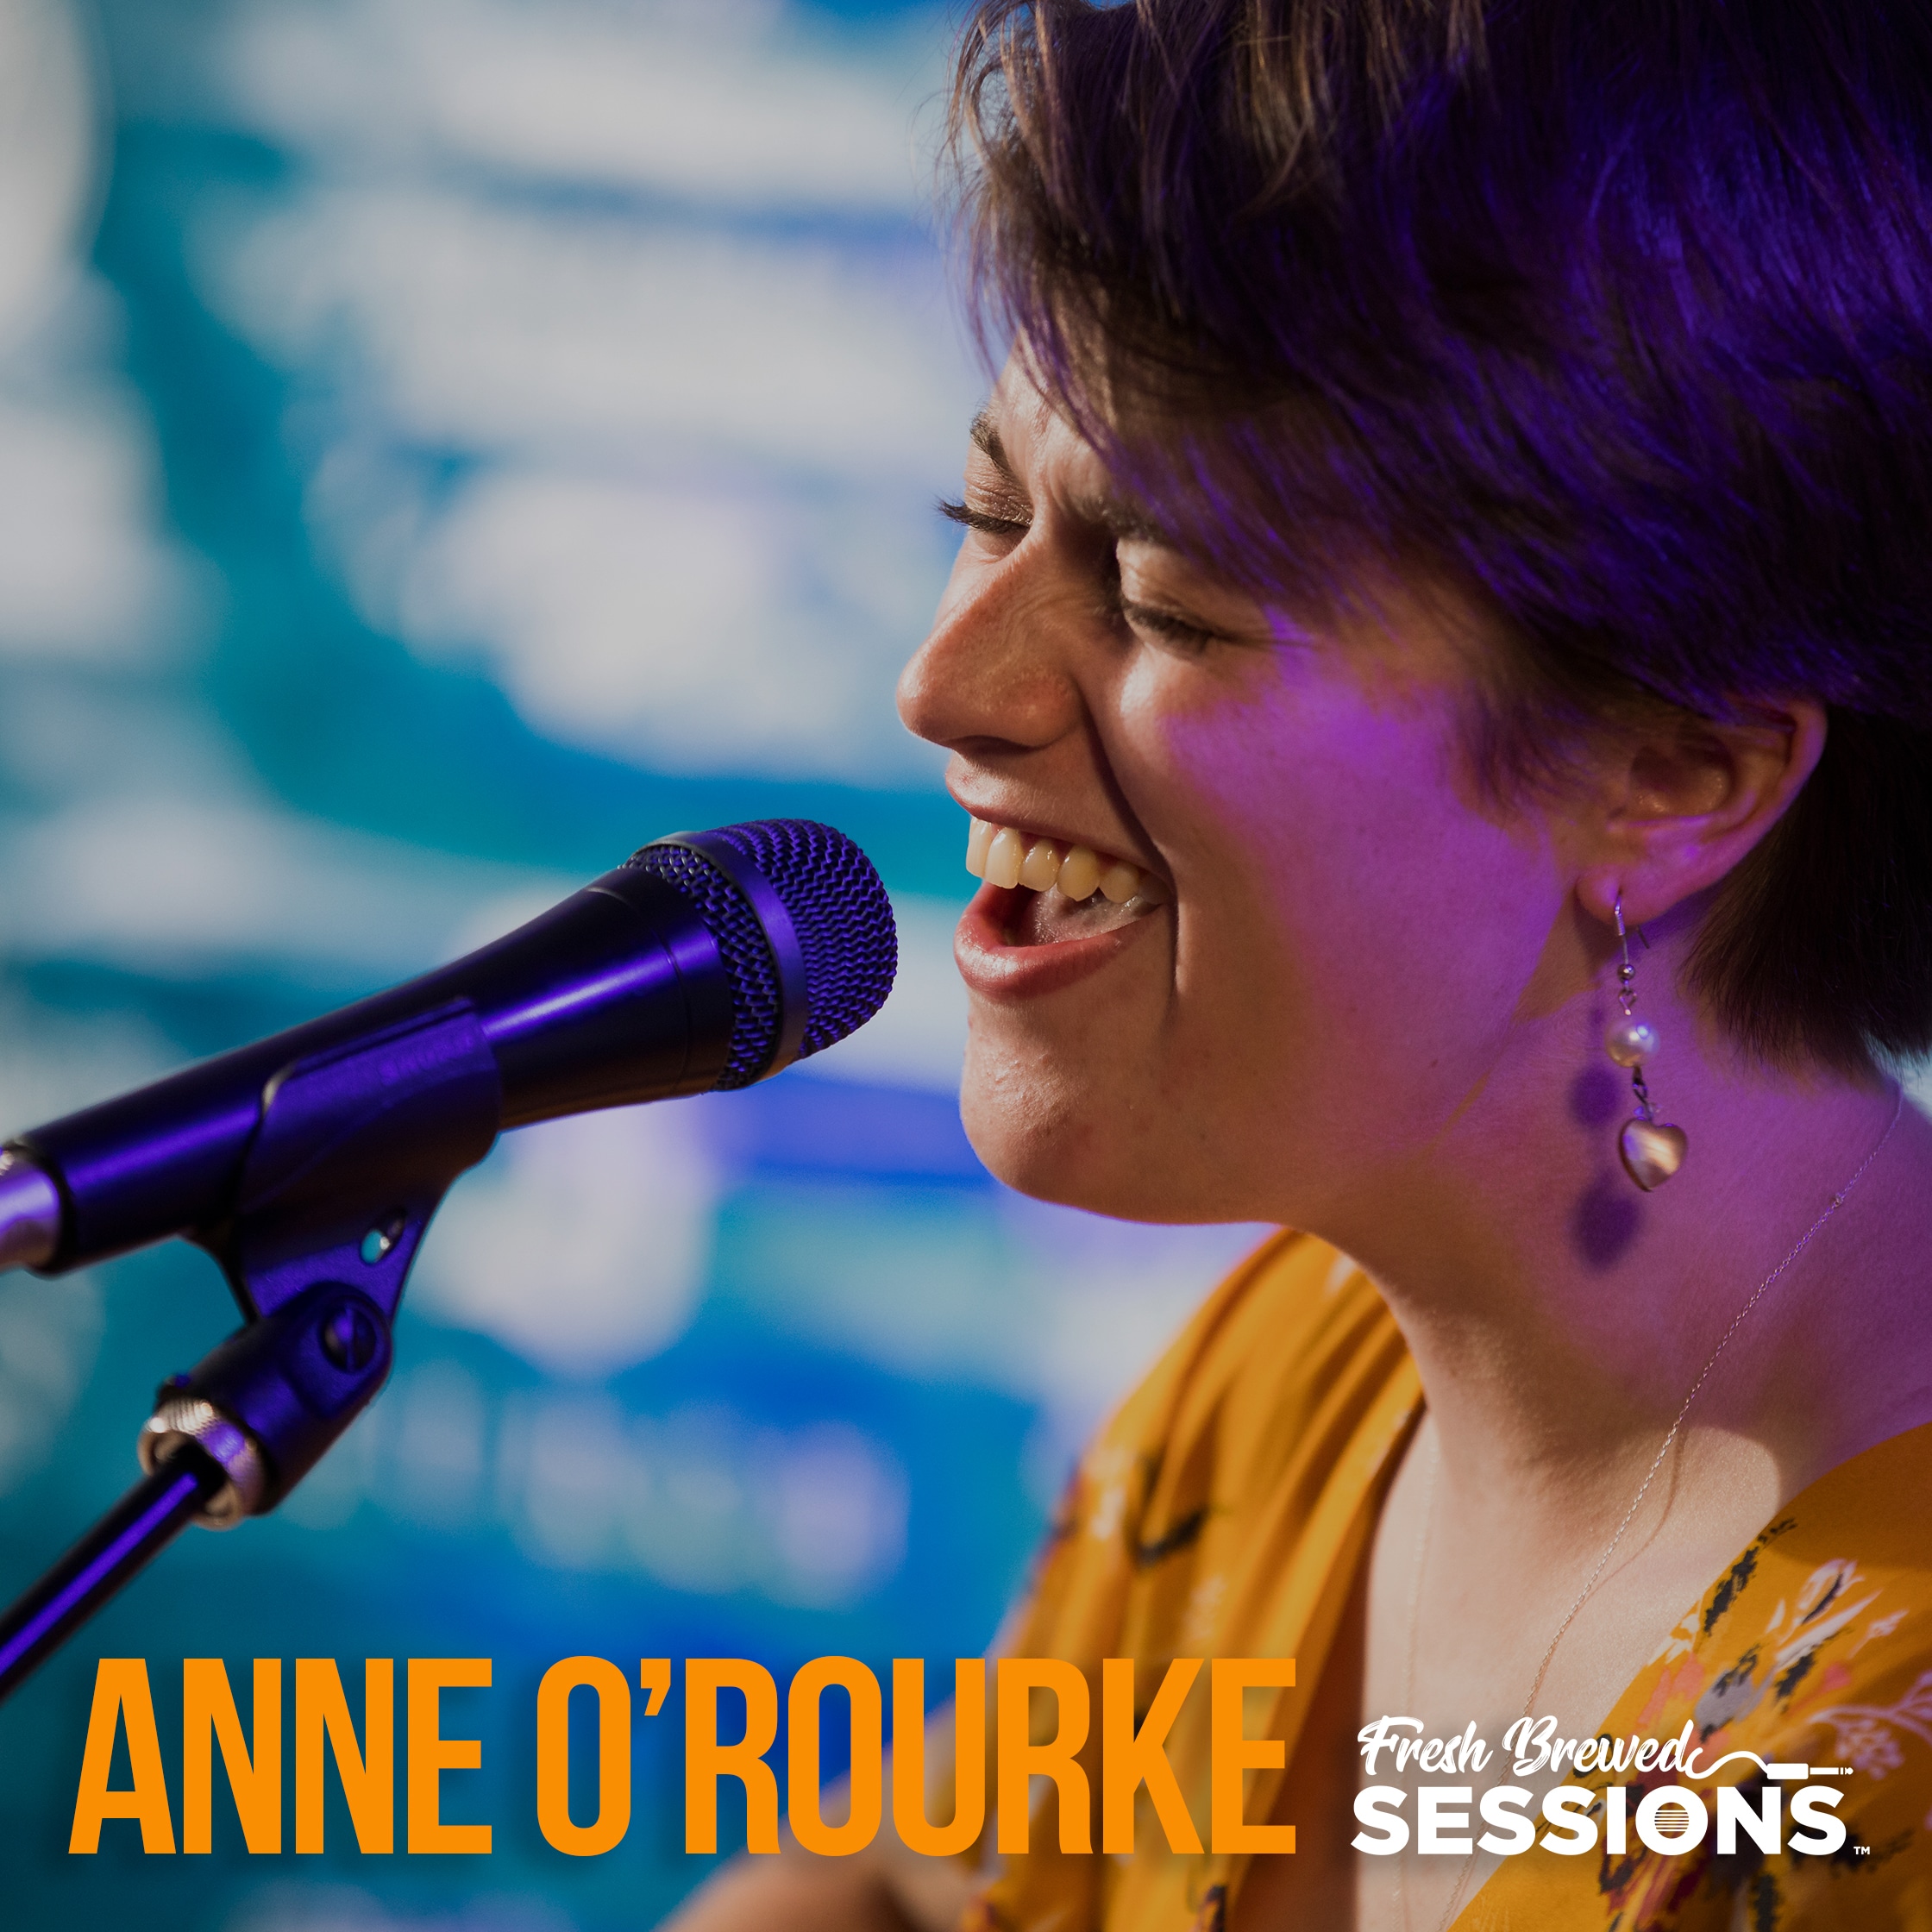 Fresh Brewed Sessions | Anne O'rourke